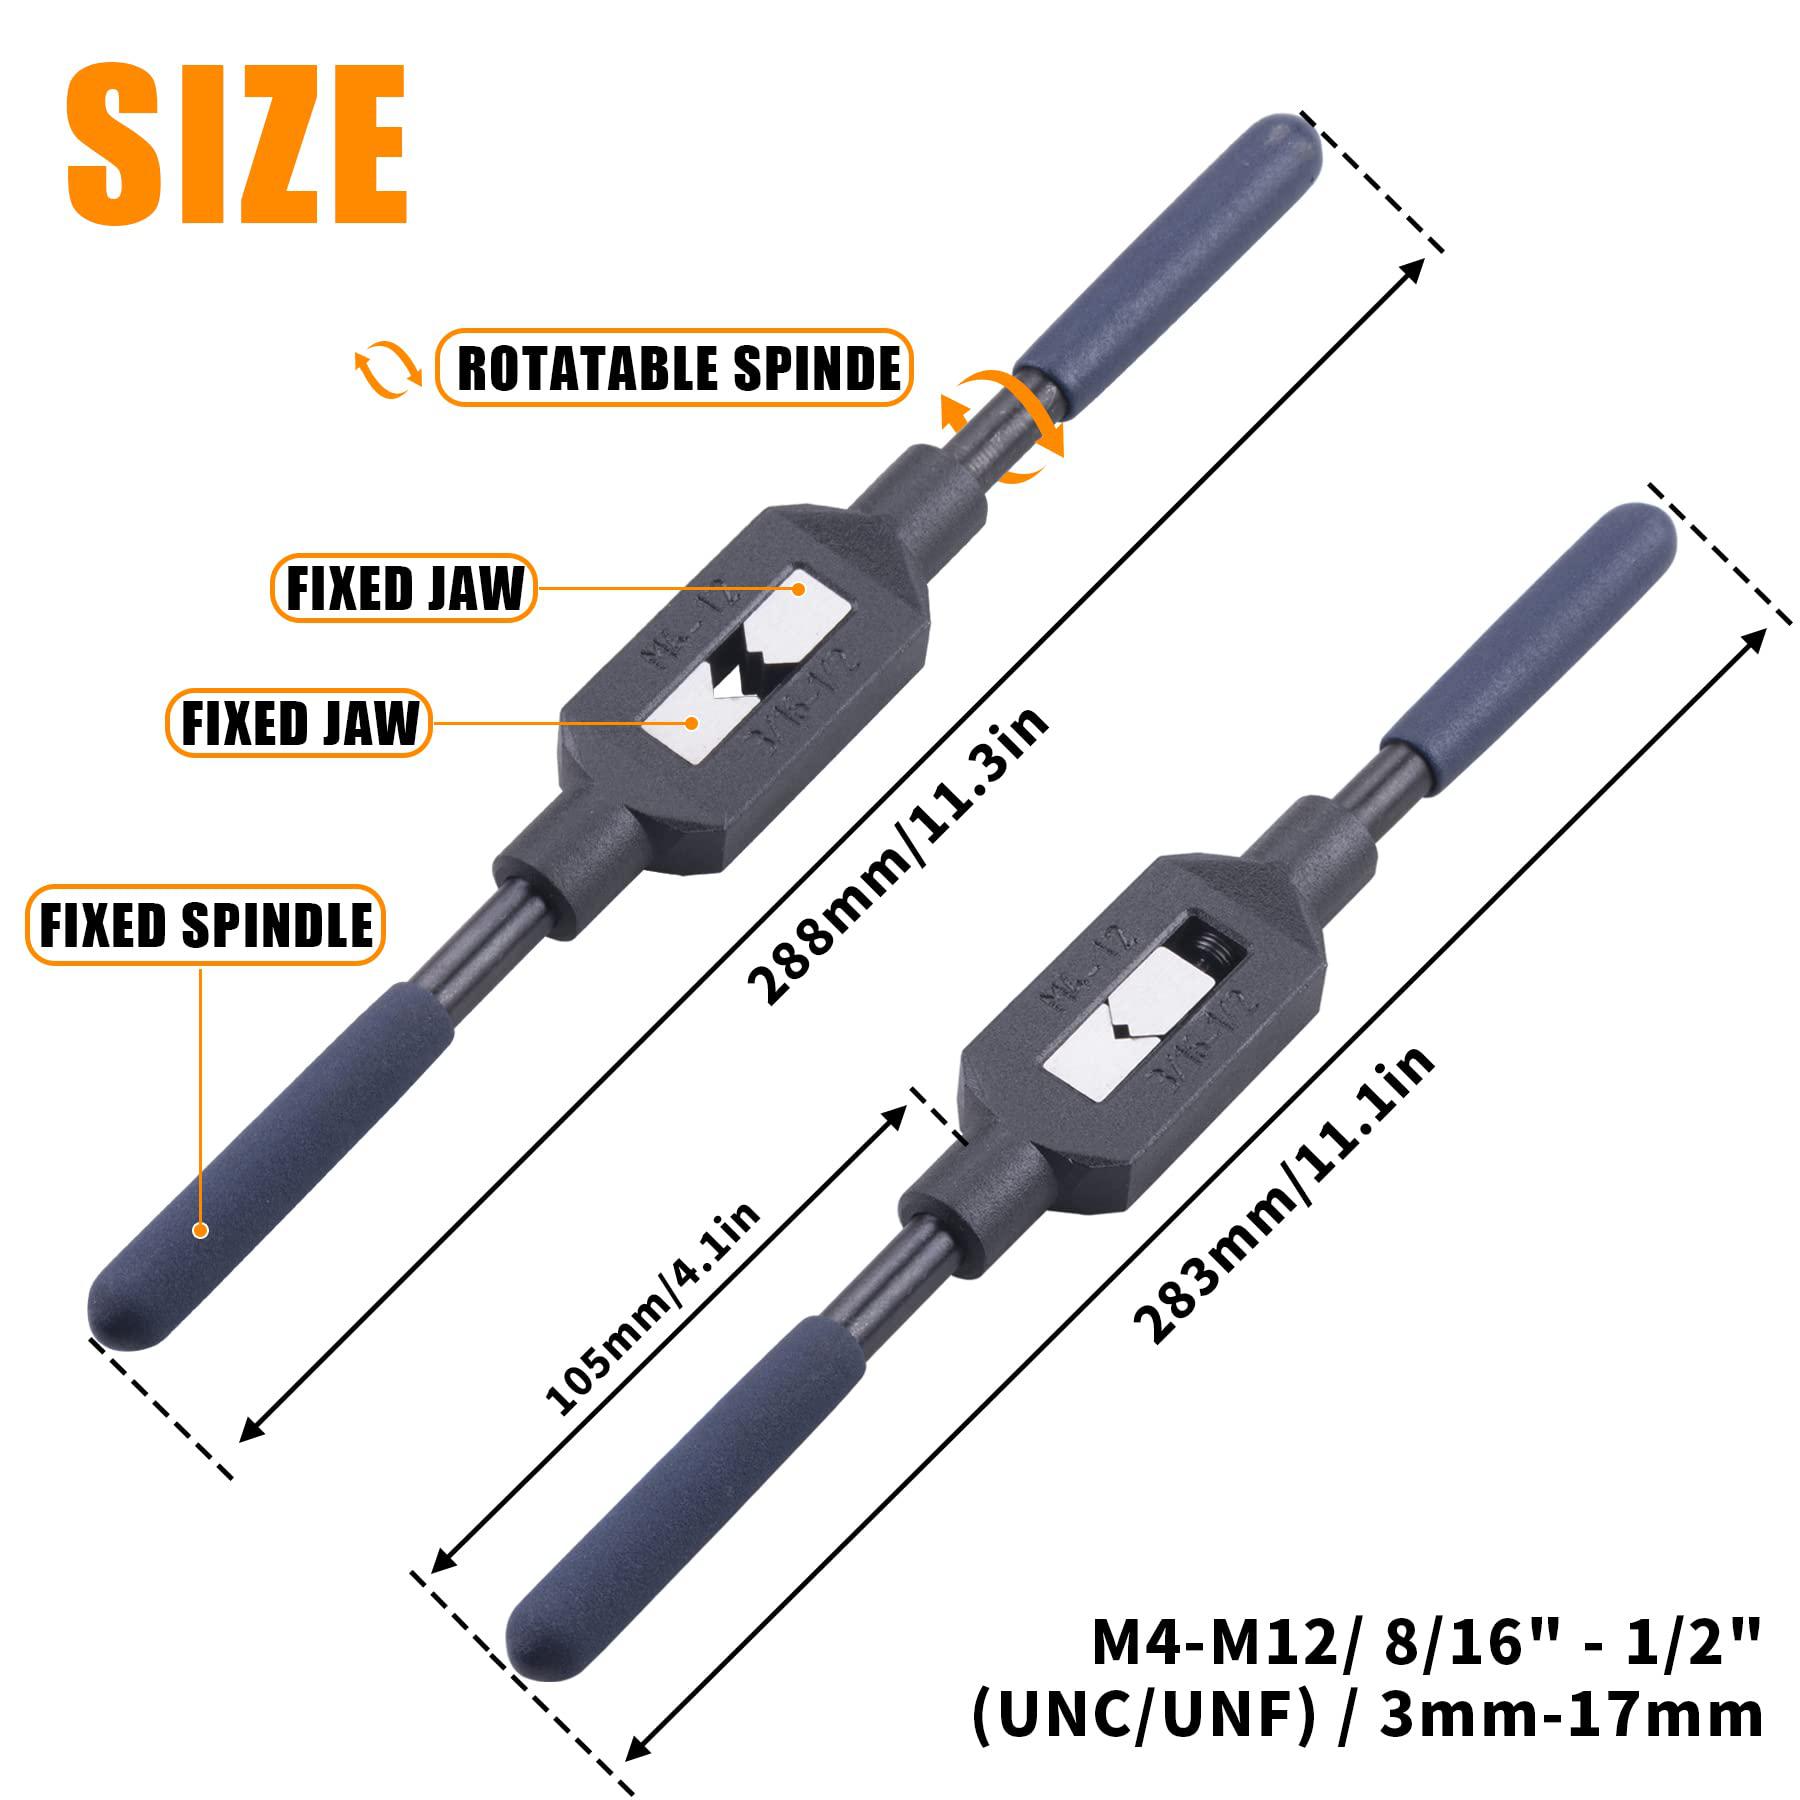 mrelc adjustable tap reamer wrench handle, or metric m4-m12 8/16"-1/2" (unc/unf) taps, tap reamer tapping hand tool